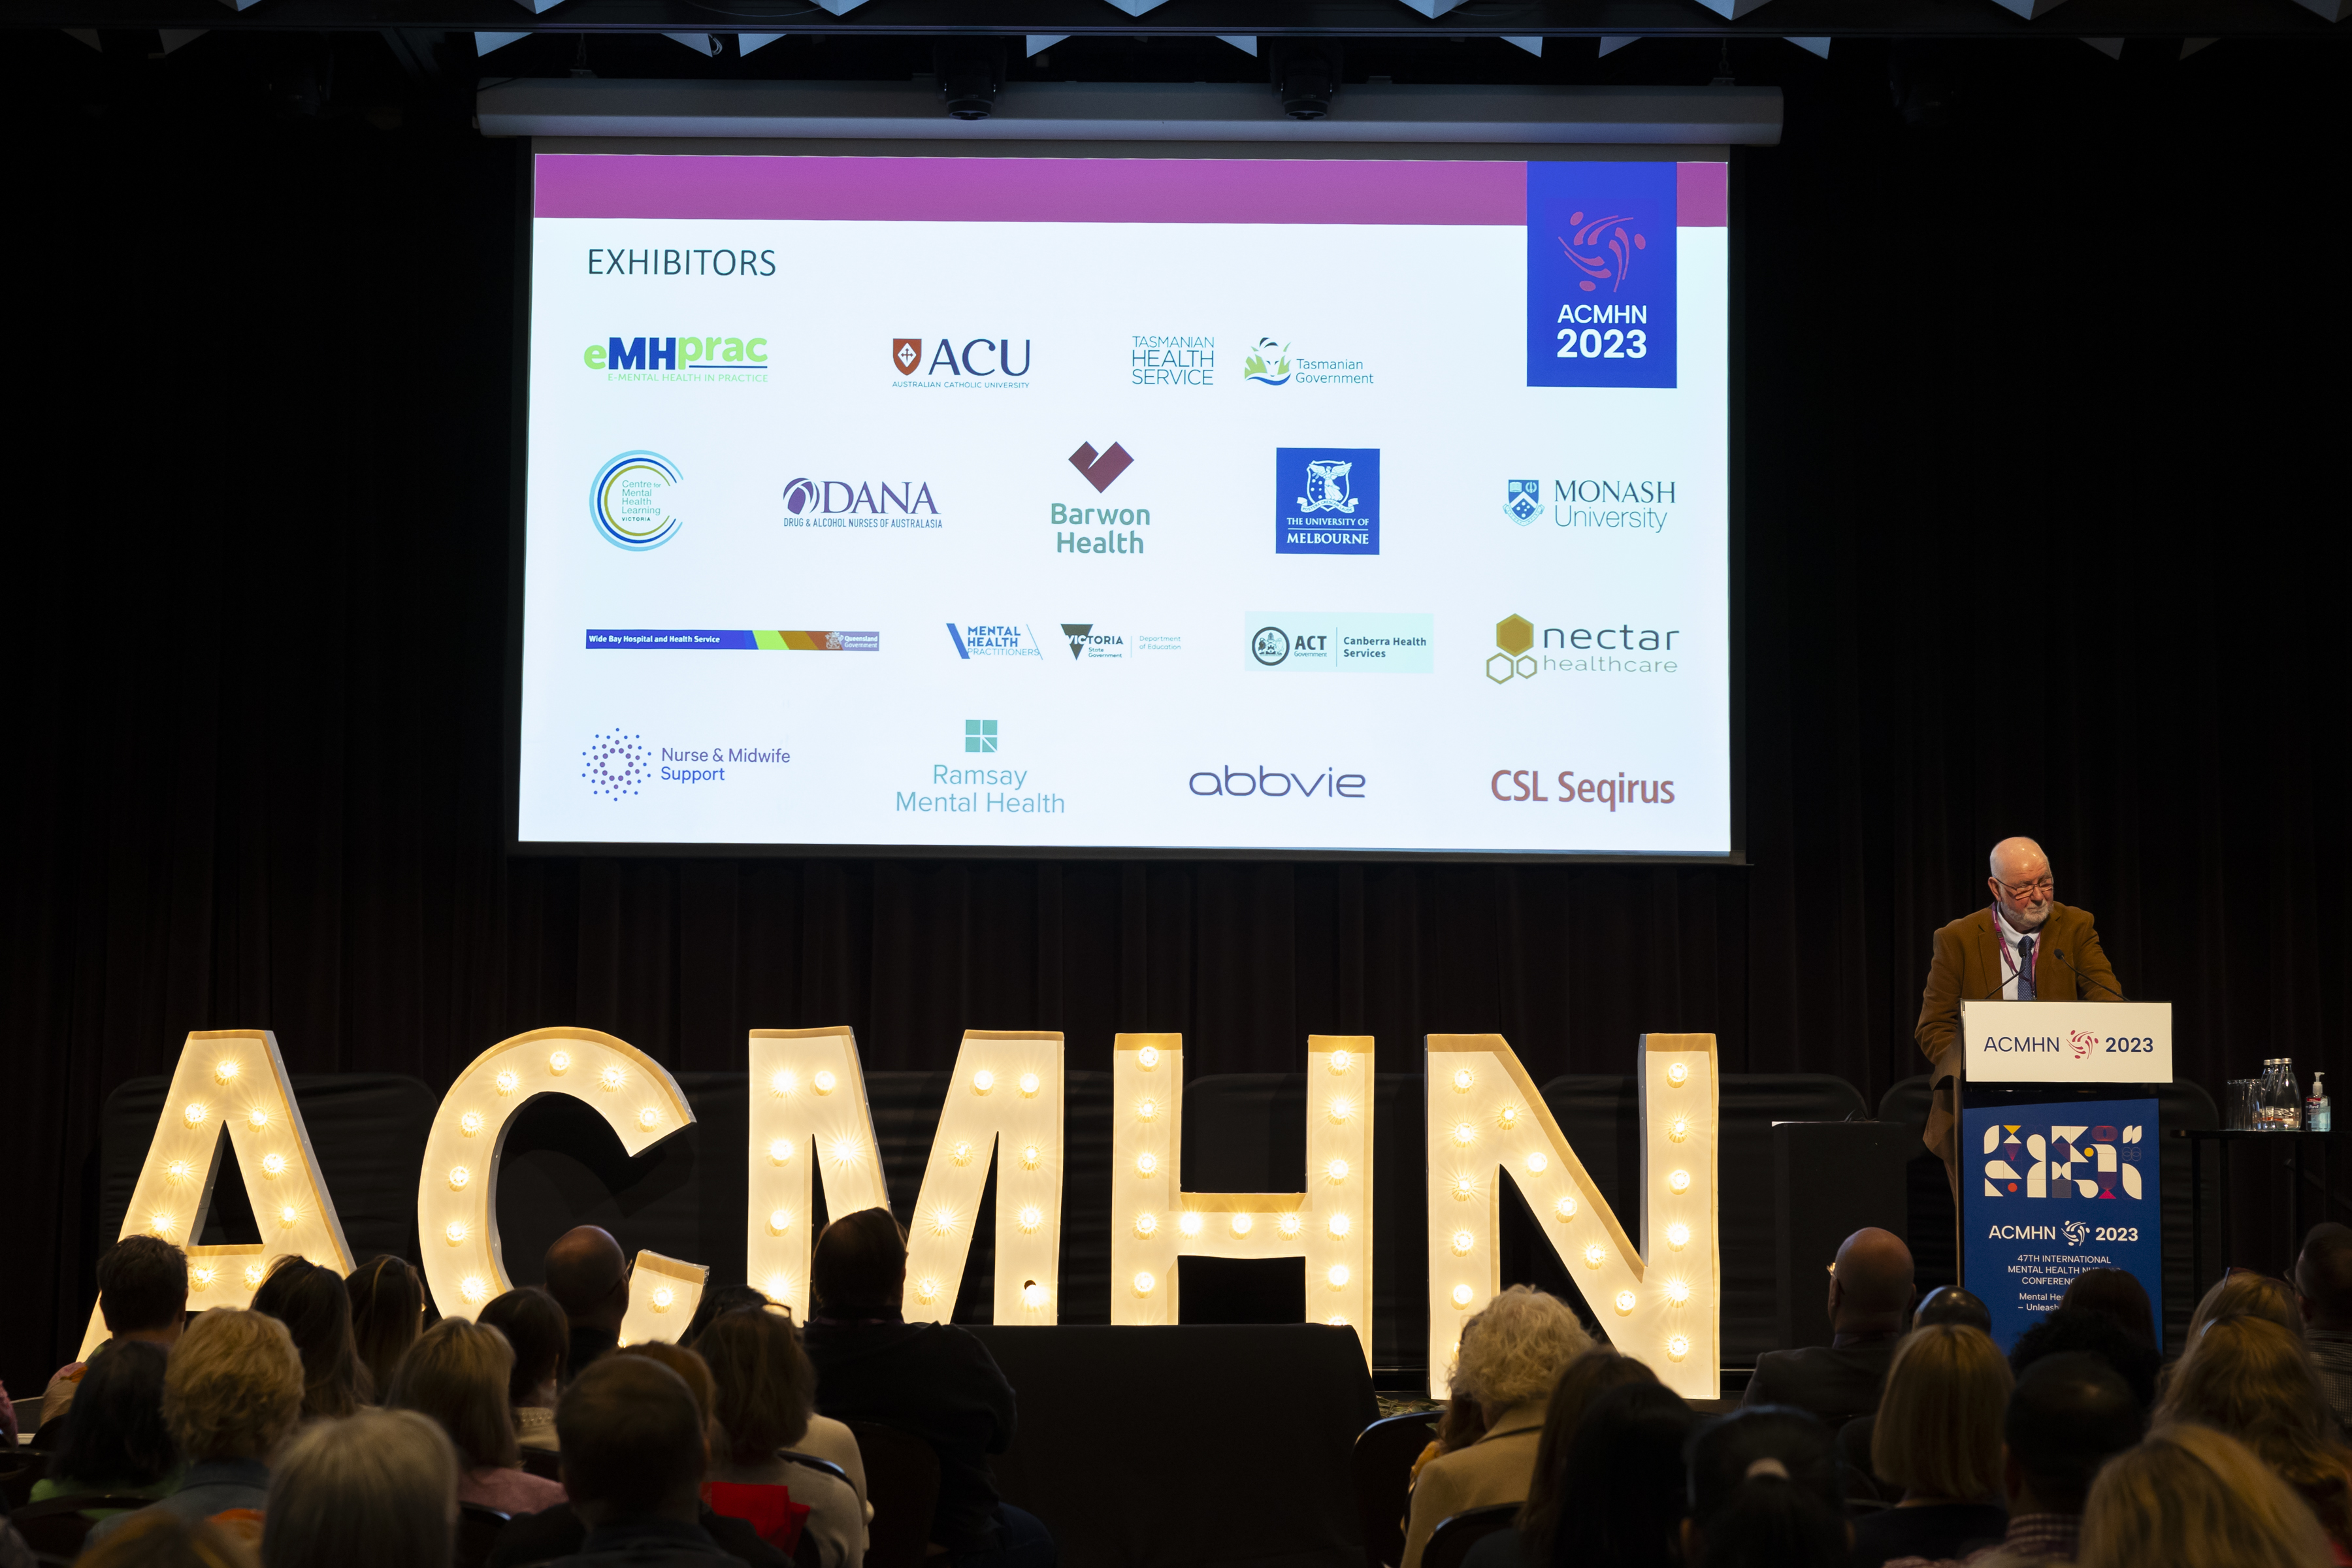 Speaker talking at a podium with ACMHN letters on stage.